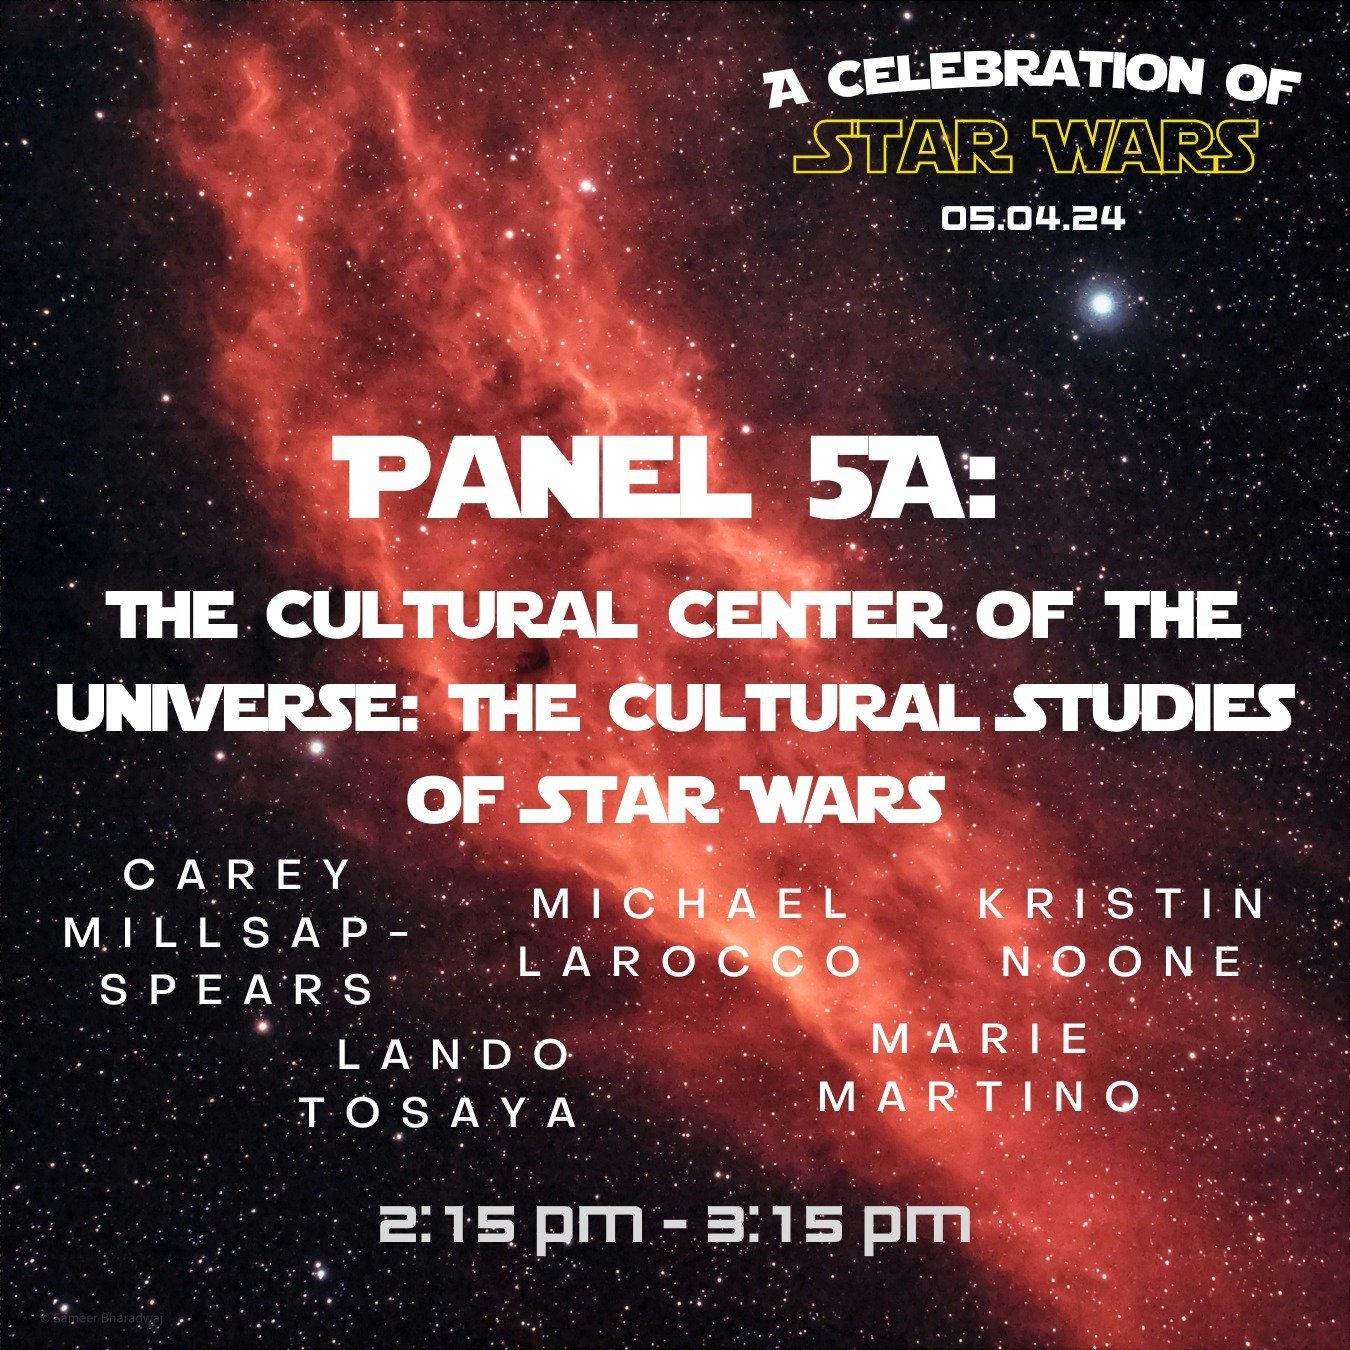 Check out Panel 5A, &ldquo;The Cultural Center of the Universe: The Cultural Studies of Star Wars&rdquo; which will be taking place in Room 806 and online from 2:15 pm - 3:15 pm!